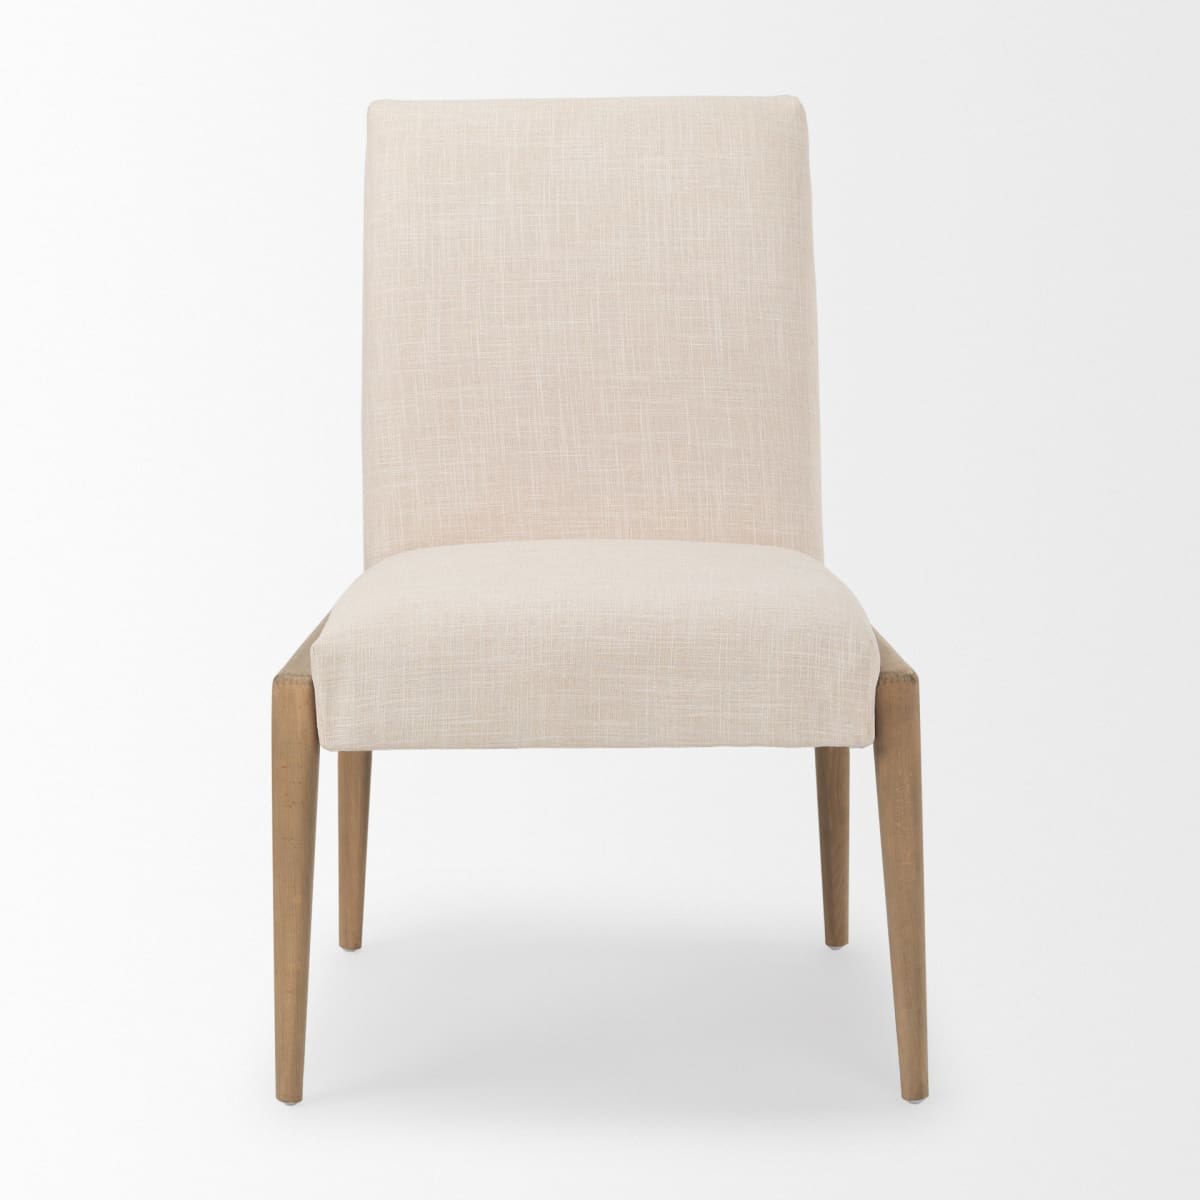 Palisades Dining Chair Cream | Light Brown Wood - dining-chairs